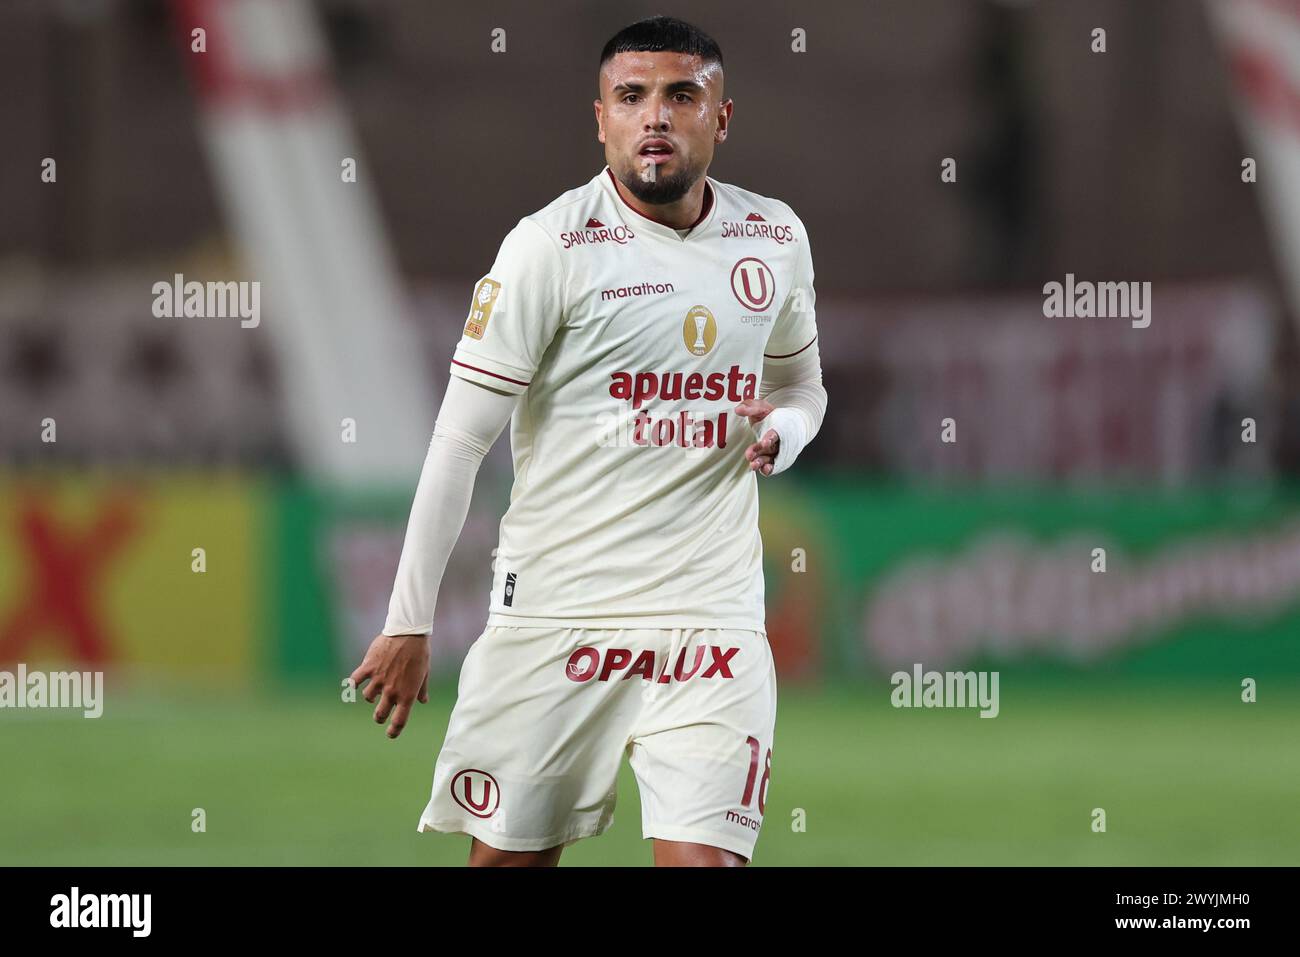 Lima, Peru. 06th Apr, 2024. Rodrigo Urena of Universitario de Deportes during the friendly match between Universitario de Deportes and Alianza Atletico played at Monumental Stadium on April 6, 2024 in Lima, Peru. (Photo by Miguel Marrufo/PRESSINPHOTO) Credit: PRESSINPHOTO SPORTS AGENCY/Alamy Live News Stock Photo